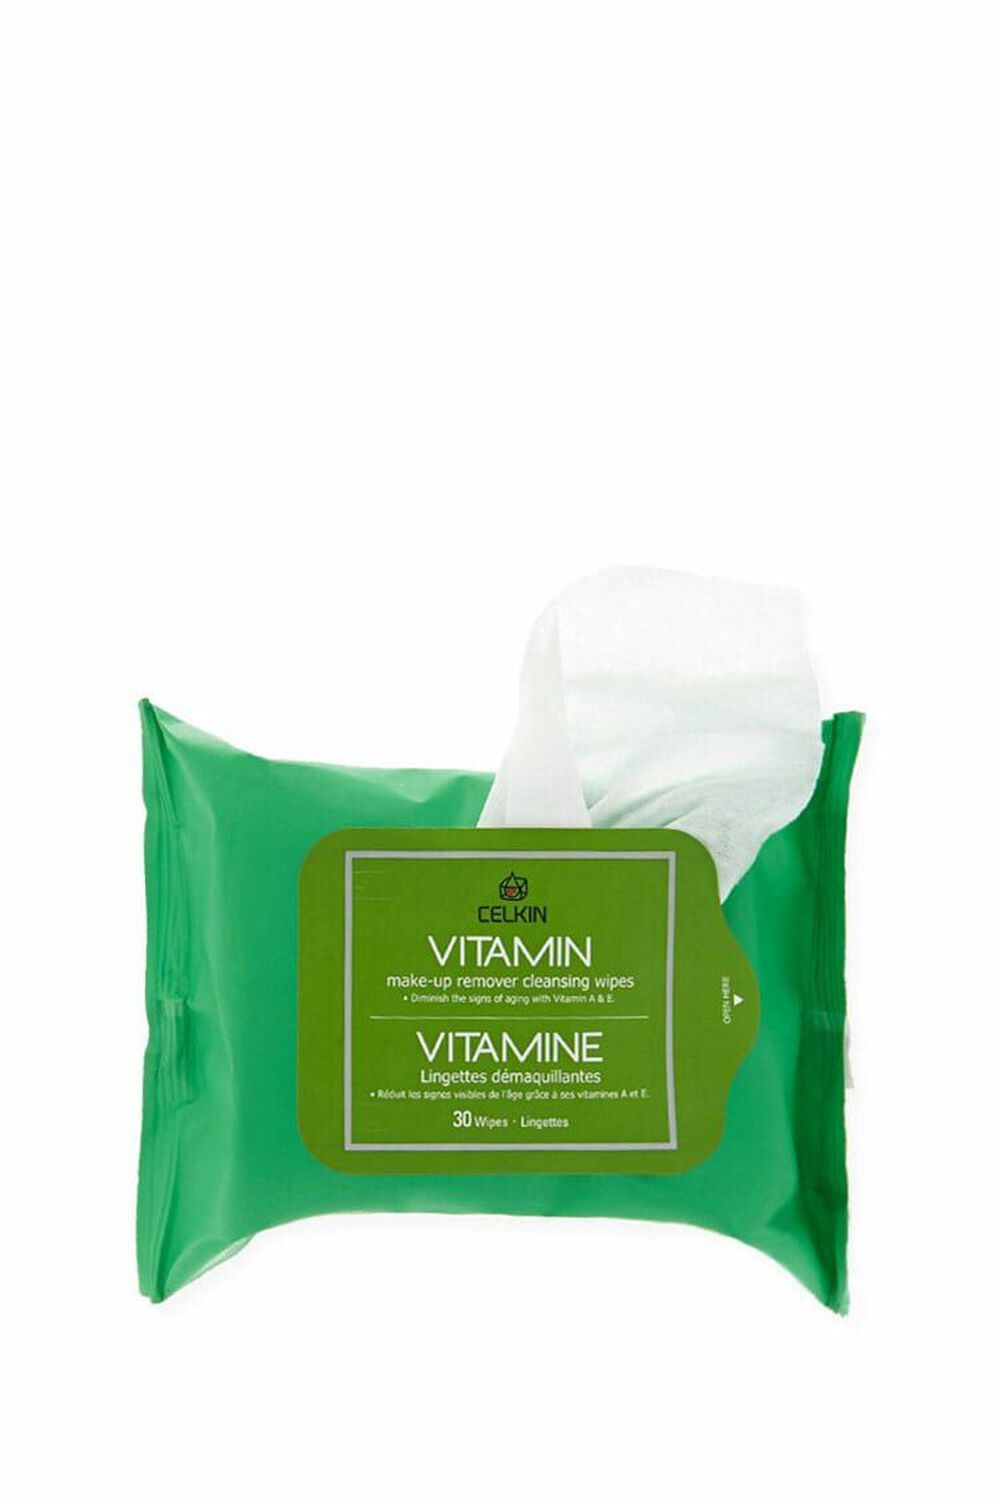 GREEN Vitamin Makeup Cleansing Wipes, image 1